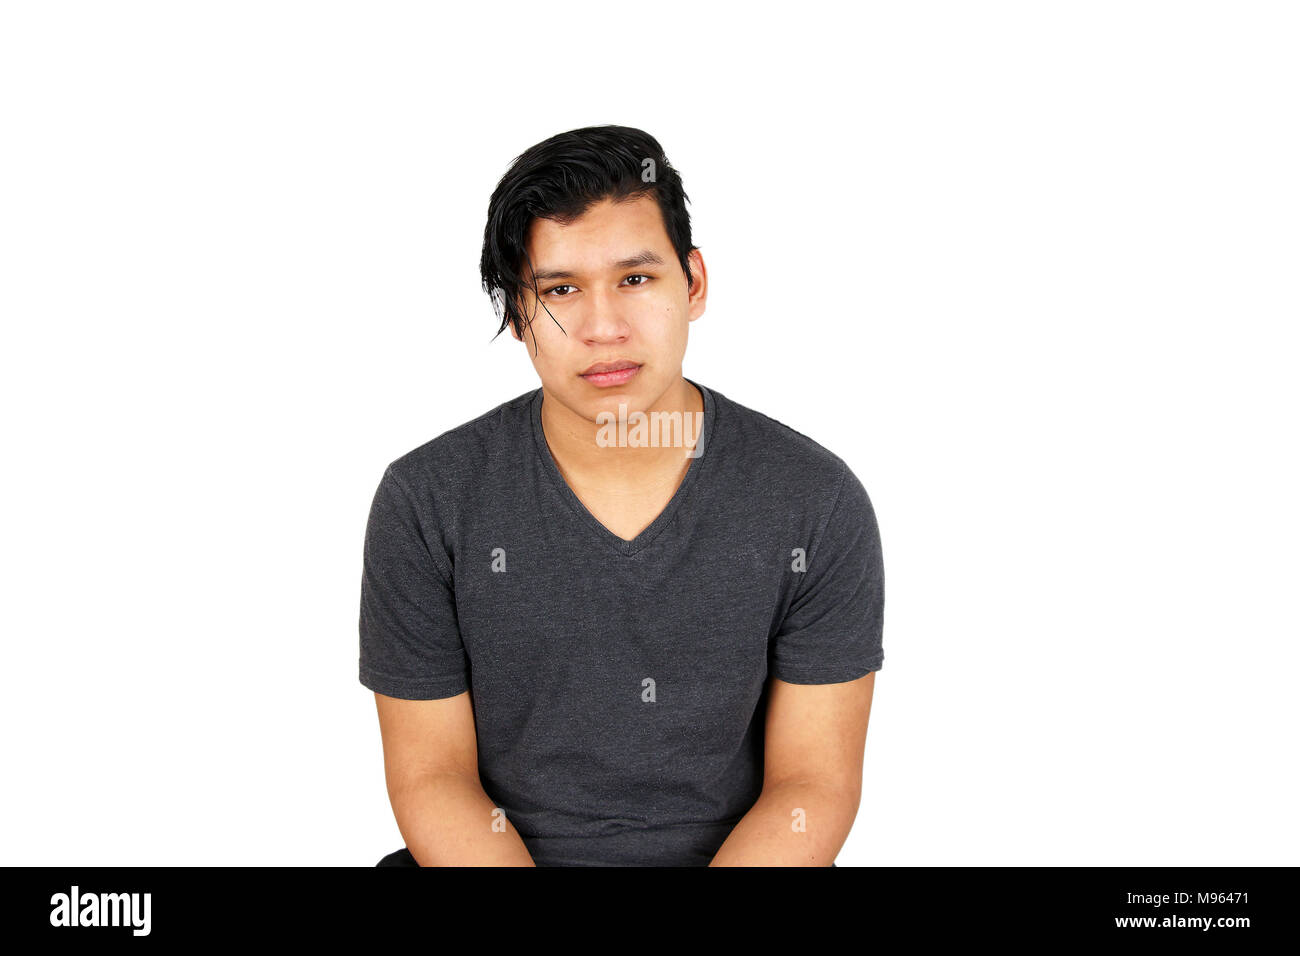 Serious young hispanic teen looking at camera, isolated on white Stock Photo